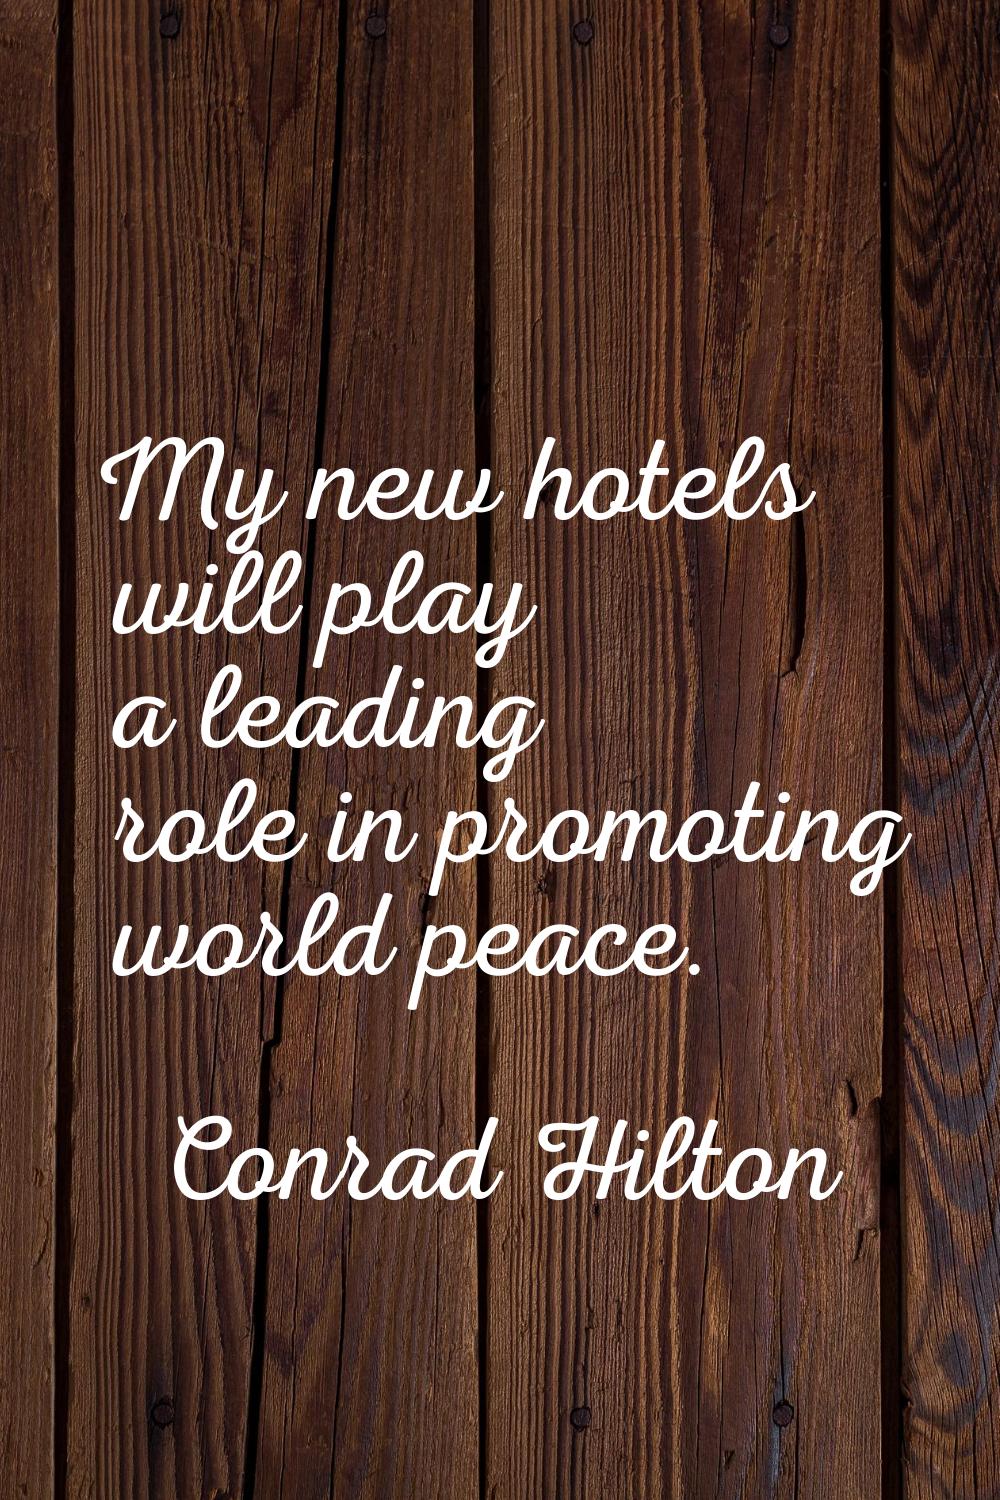 My new hotels will play a leading role in promoting world peace.